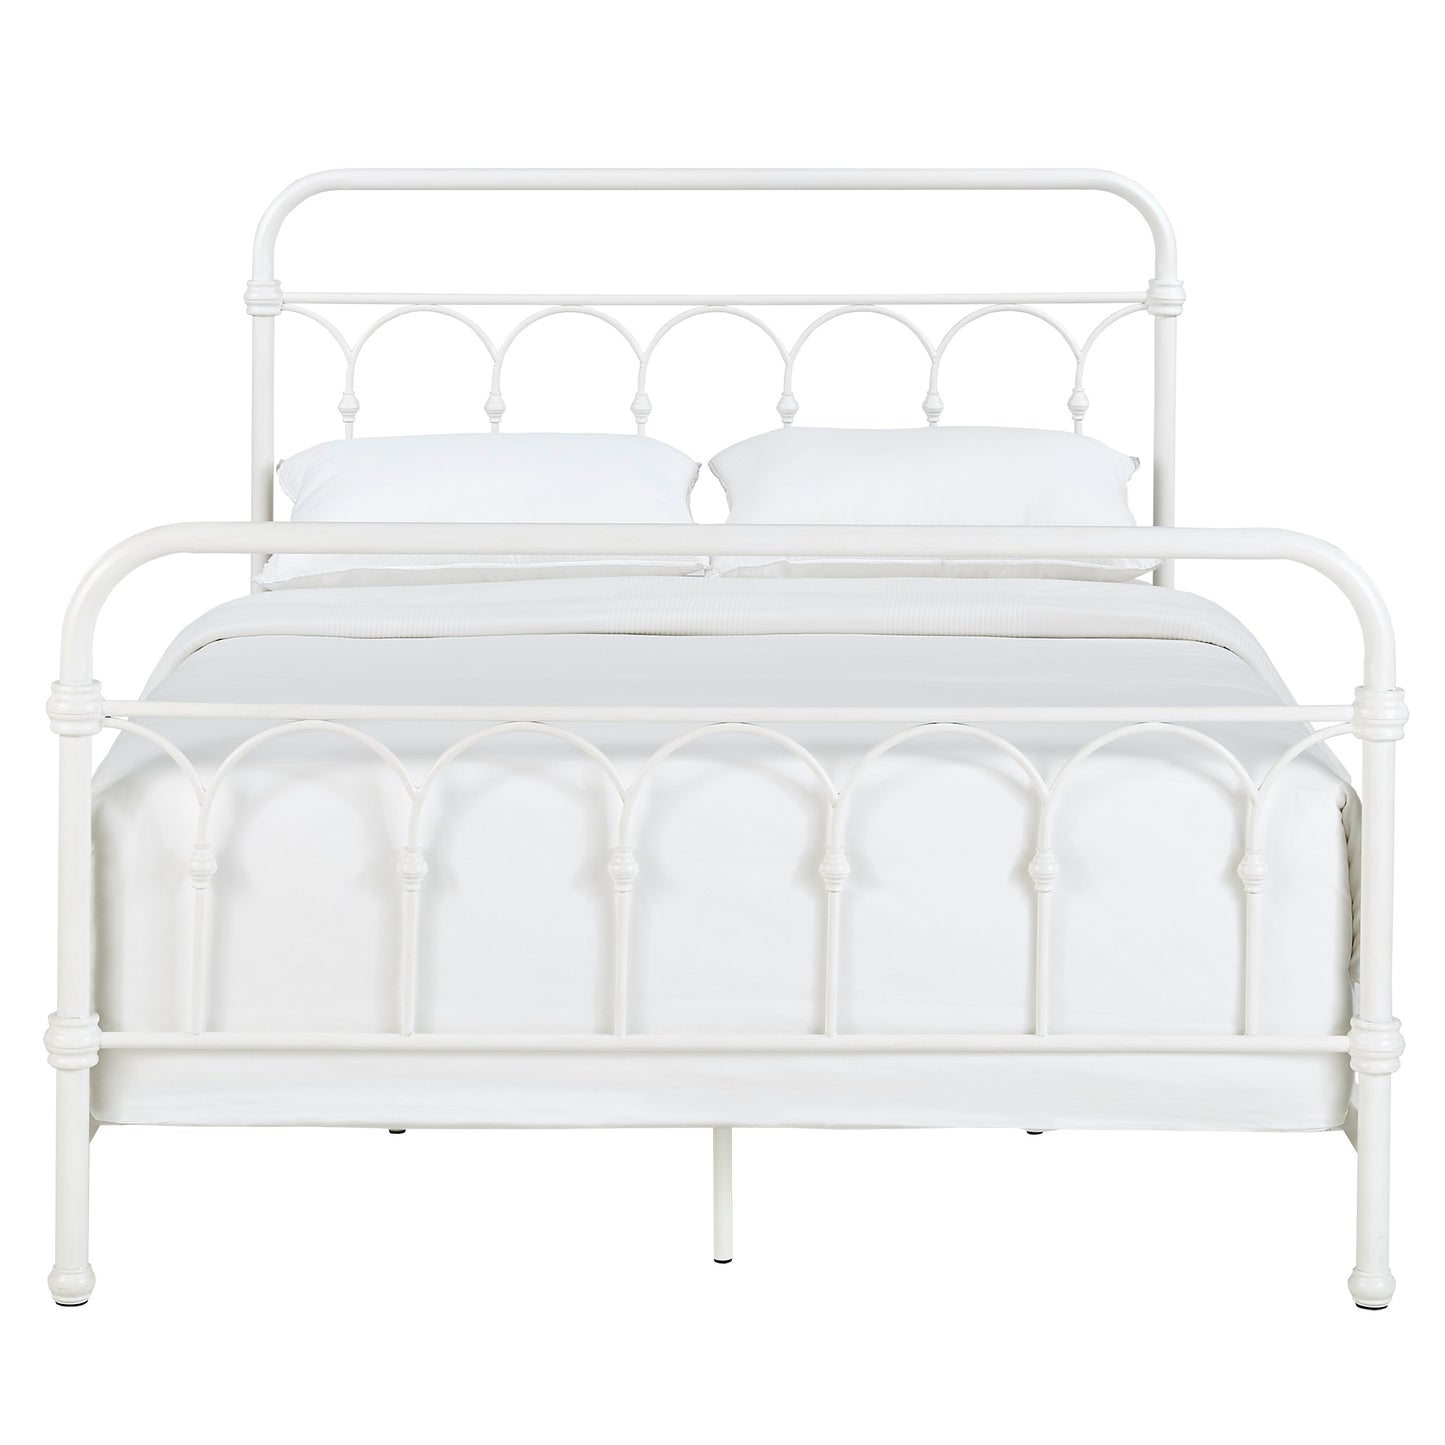 Casted Knot Metal Bed - Antique White, Queen (Queen Size)